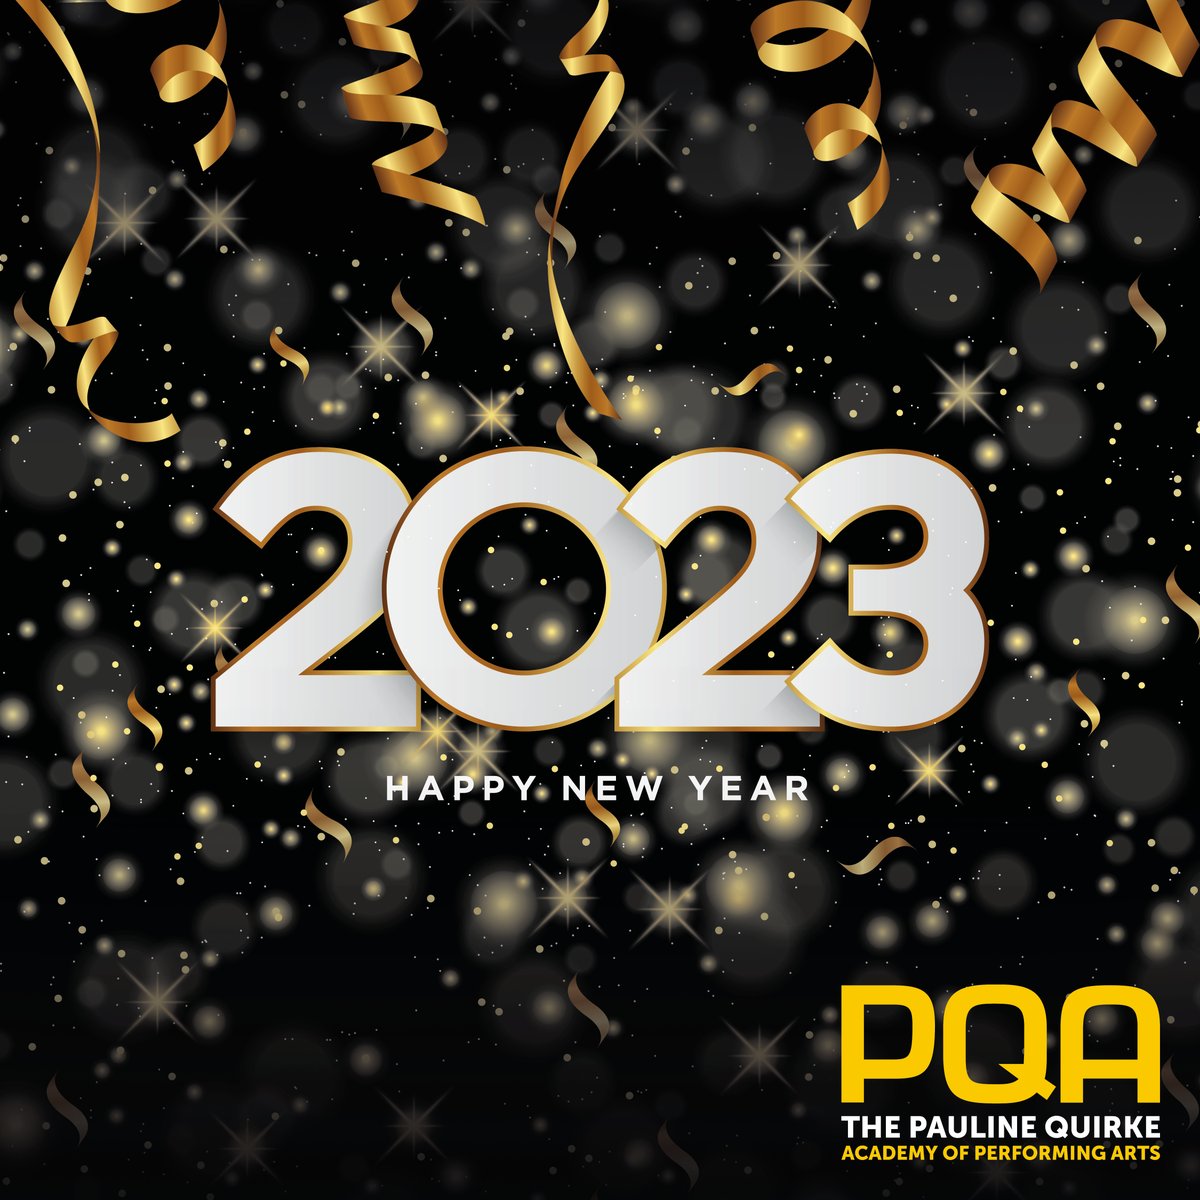 HAPPY NEW YEAR PQA'ERS! 🎉 We cannot wait for all the amazing #PQAMoments that are to come this year ⭐ Let us know what some of your goals are for 2023! 👇 #HappyNewYear